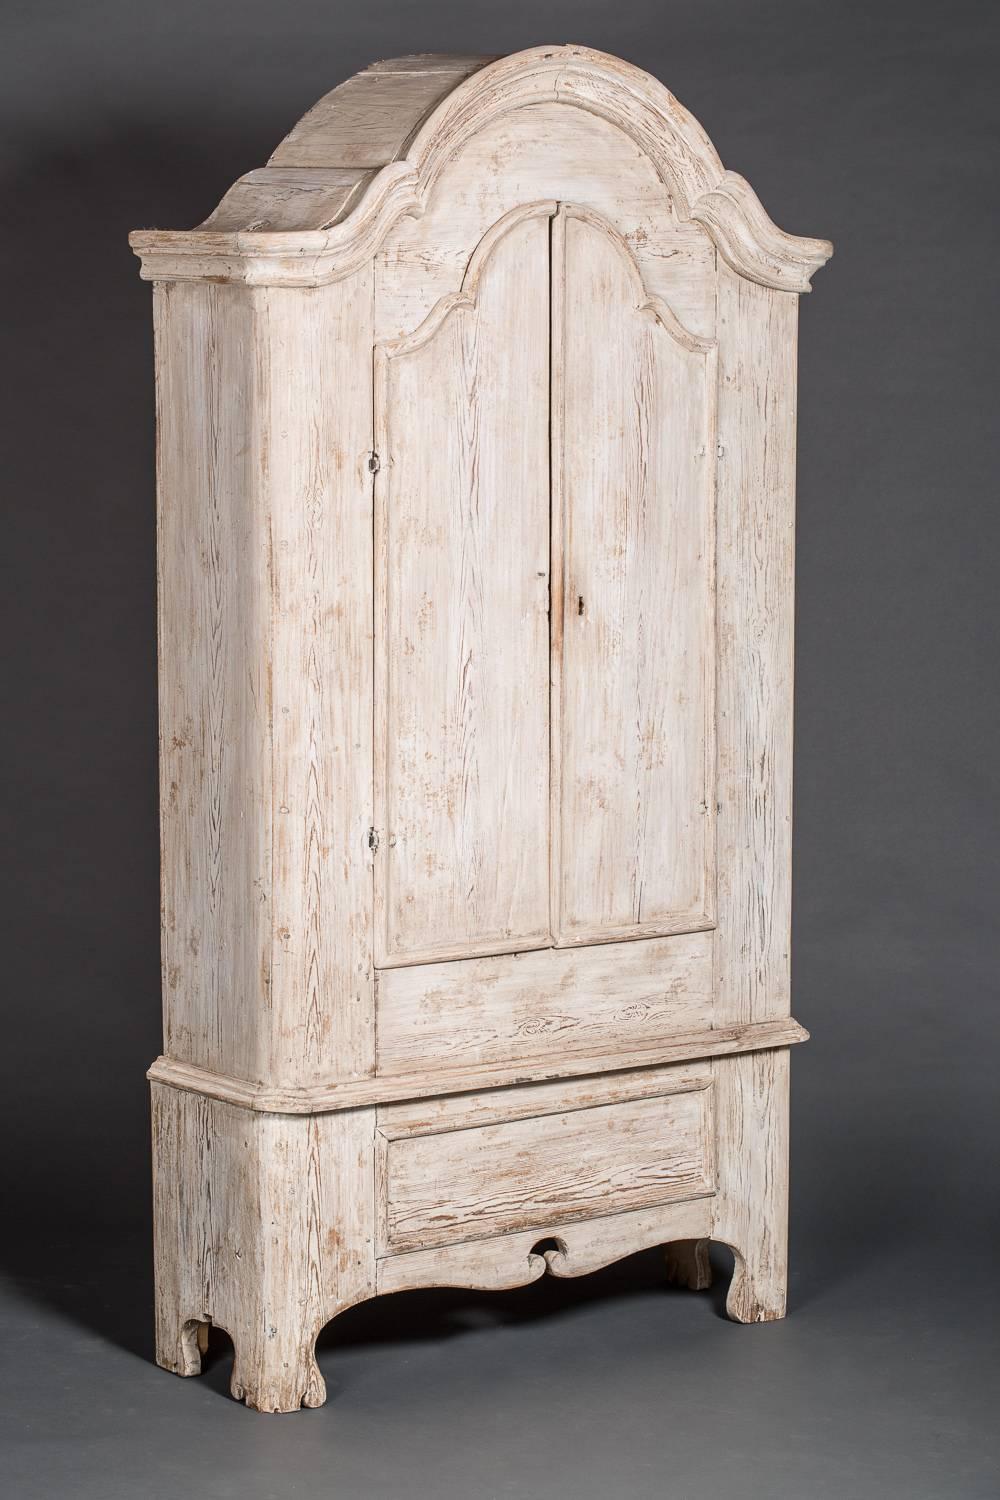 Rococo Jamtland cabinet from North Sweden.